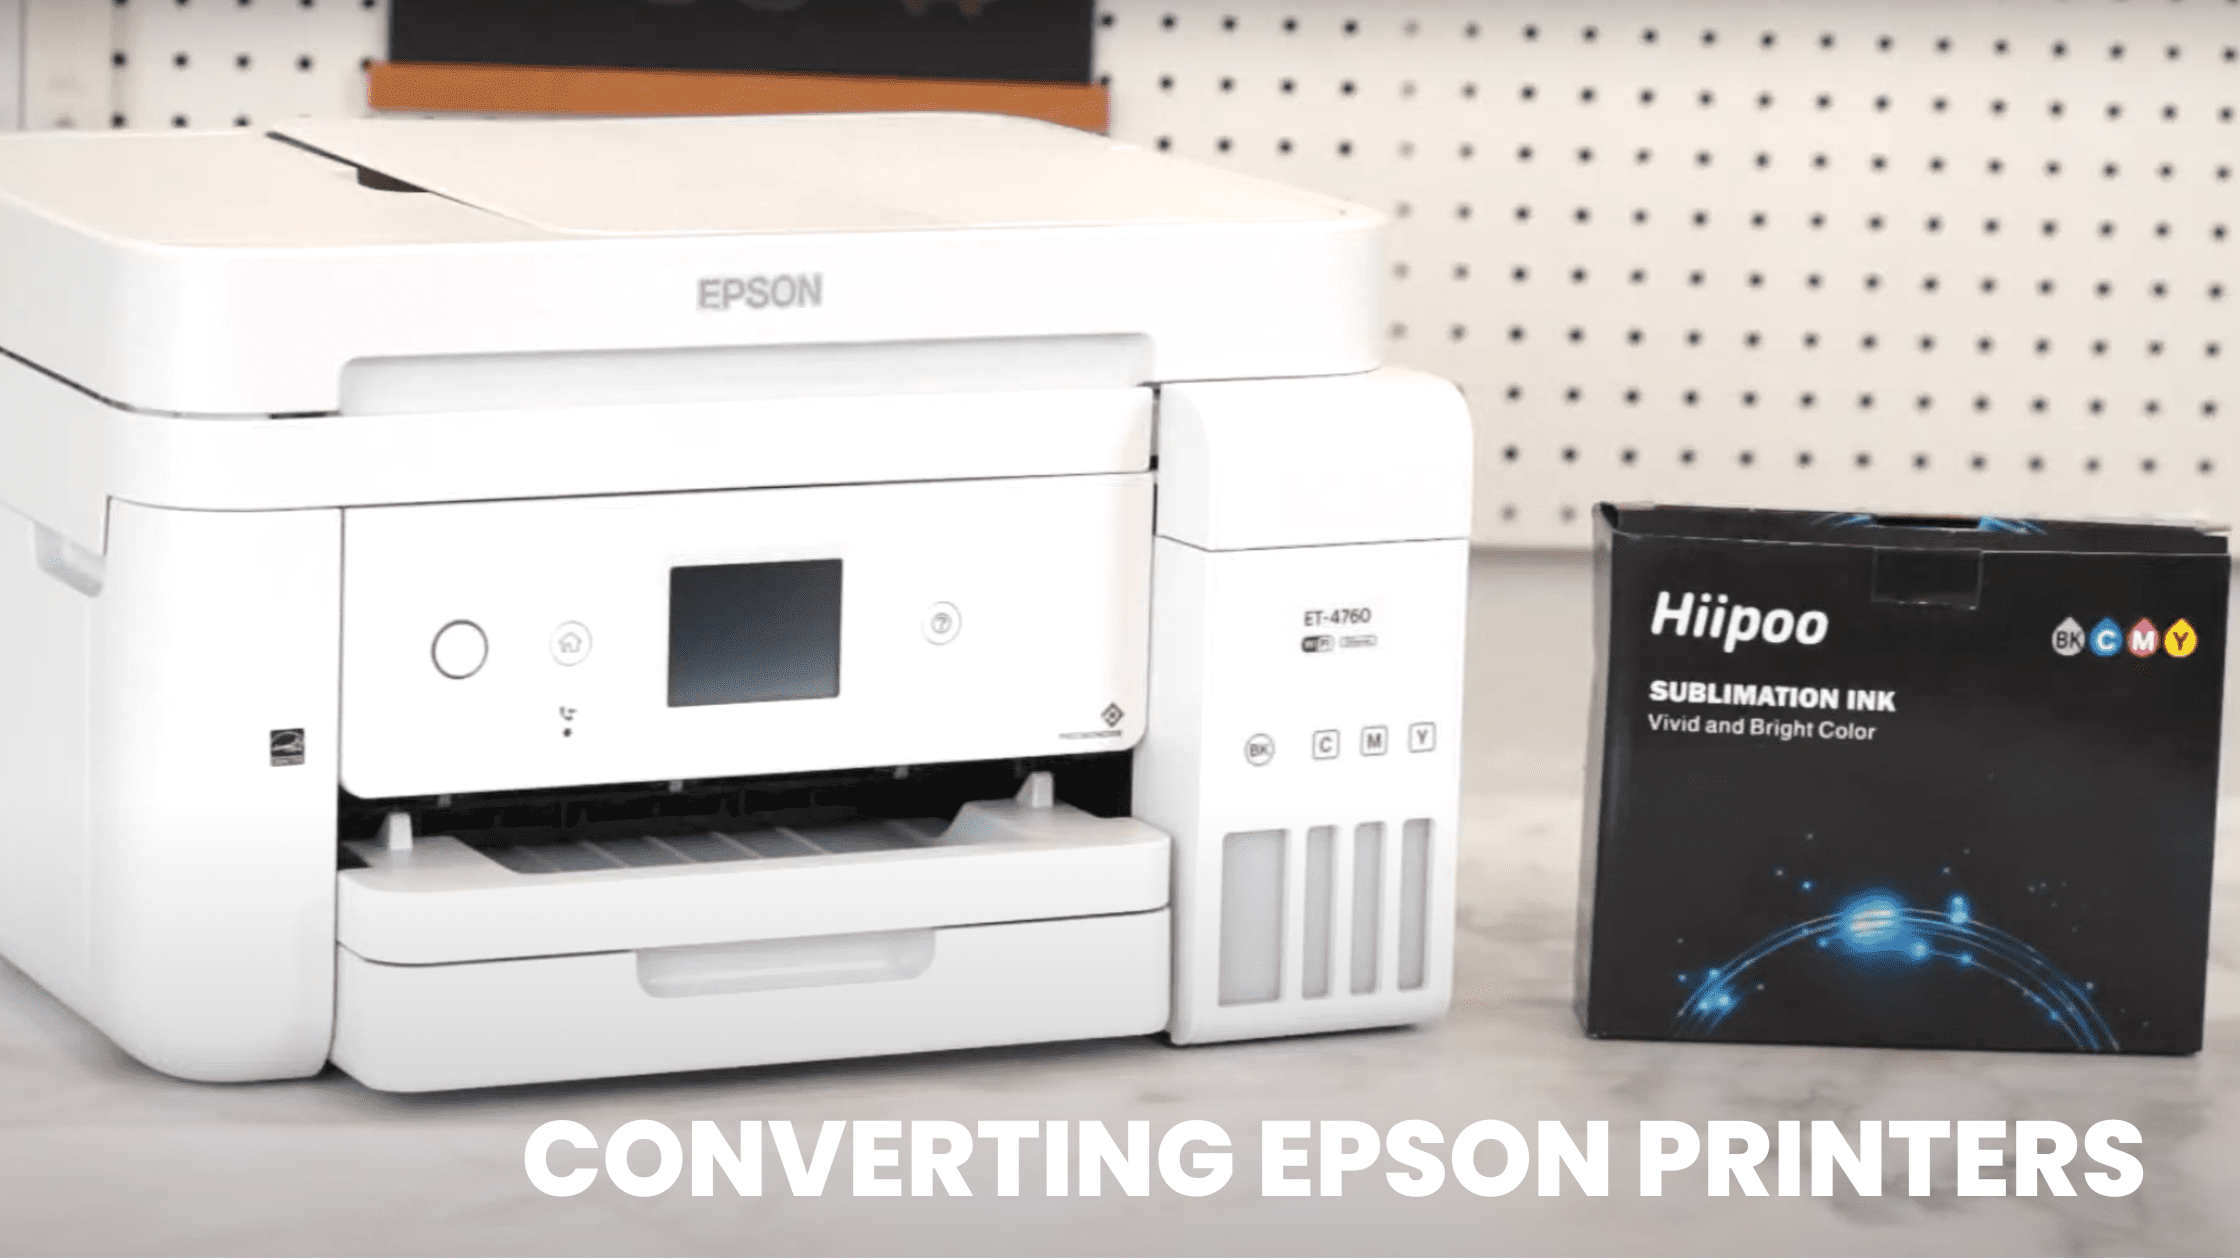 Converting an Epson EcoTank Printer into a Sublimation Printer: A  Step-by-Step Guide 